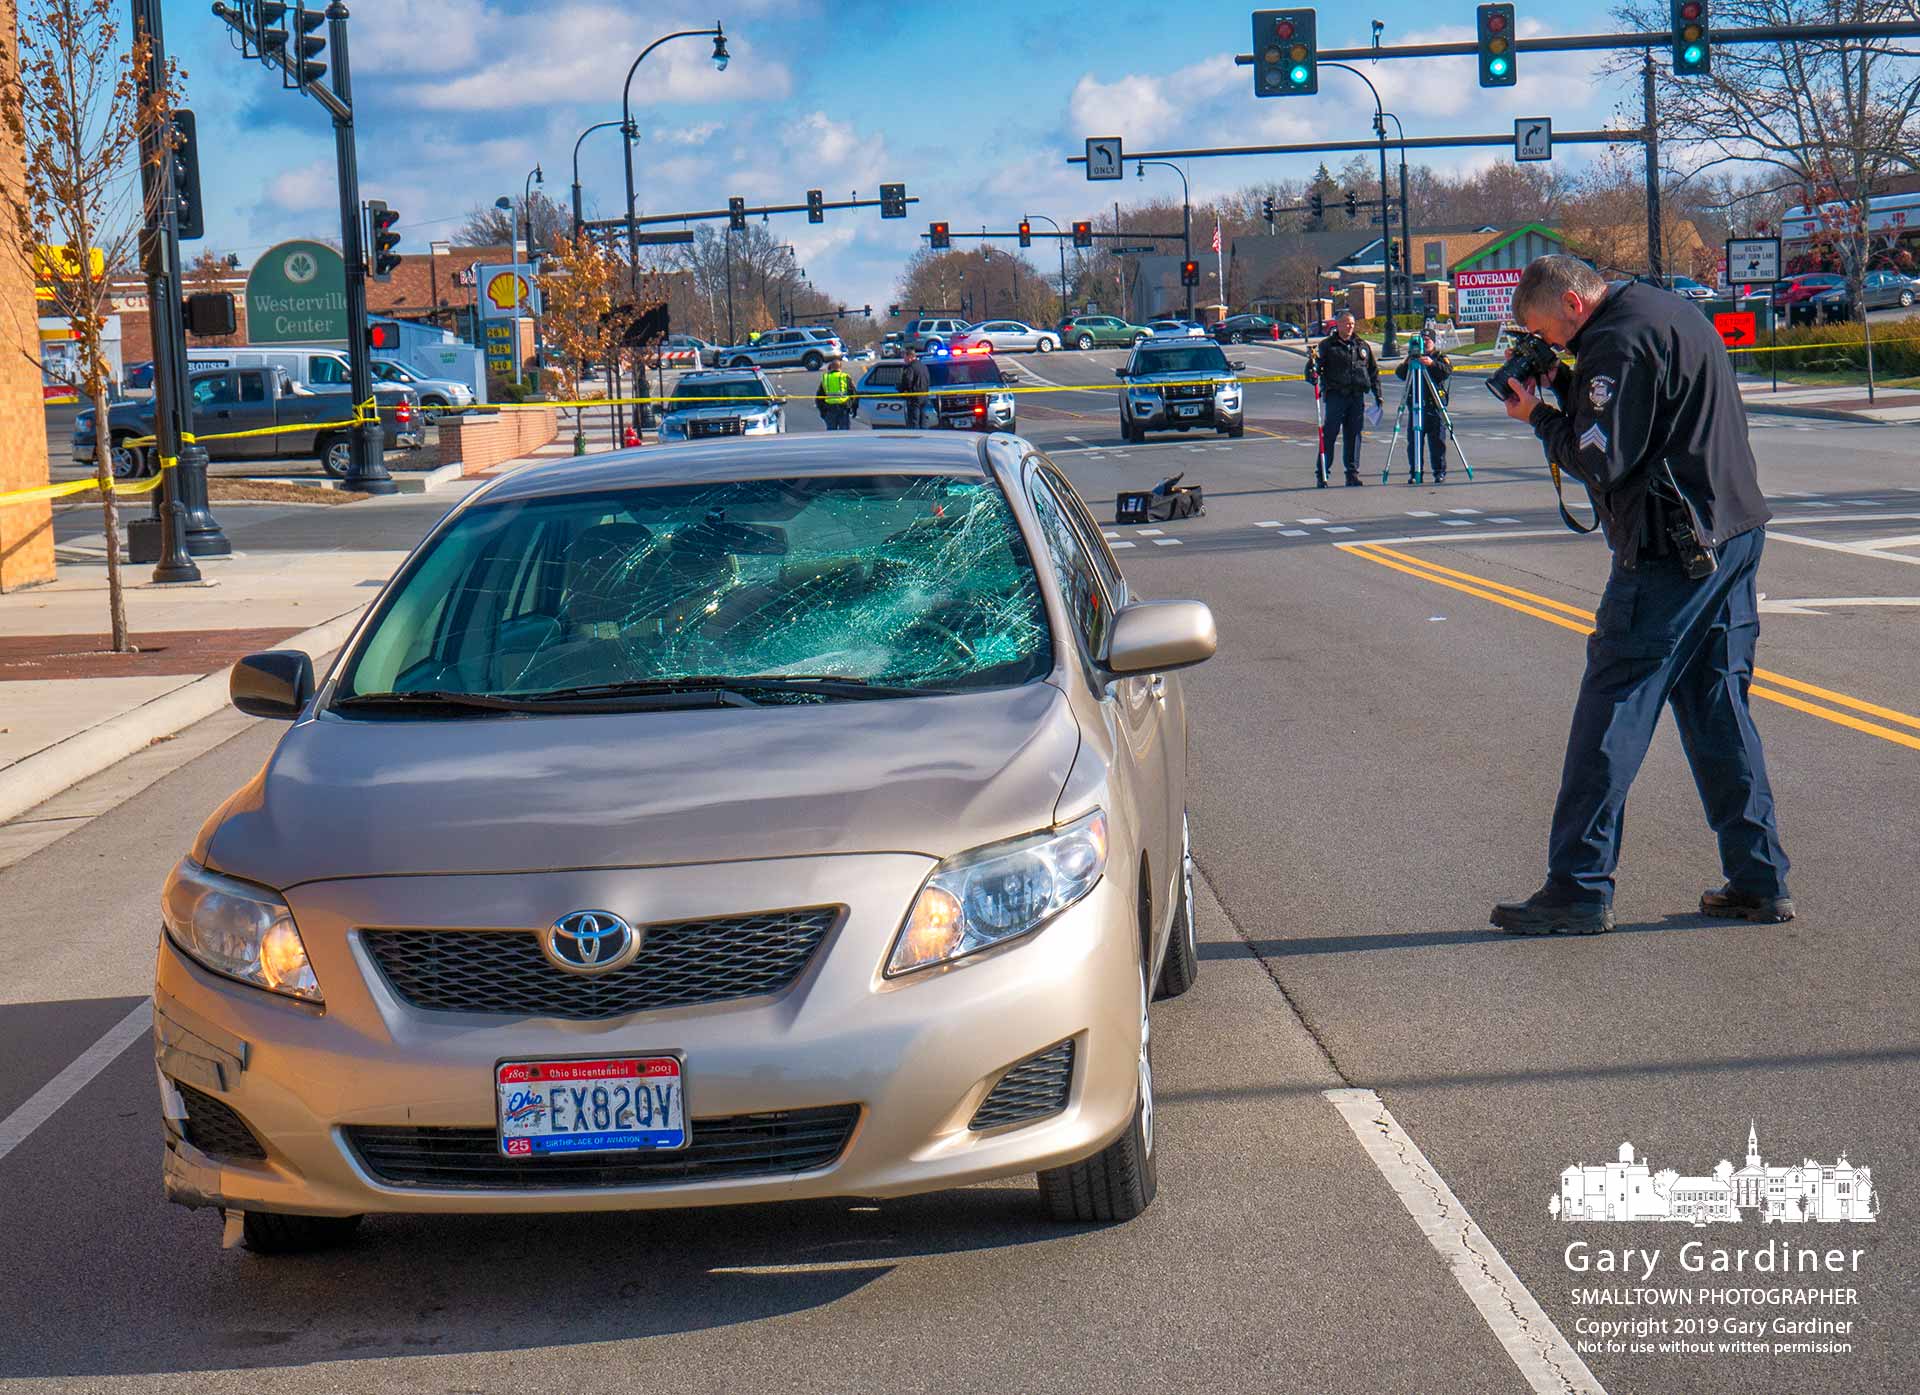 The Westerville Police Department accident investigation team collects data and evidence from a car and intersection where a pedestrian was struck while crossing Schrock near Roush Hardware. My Final Photo for Dec. 4, 2019.